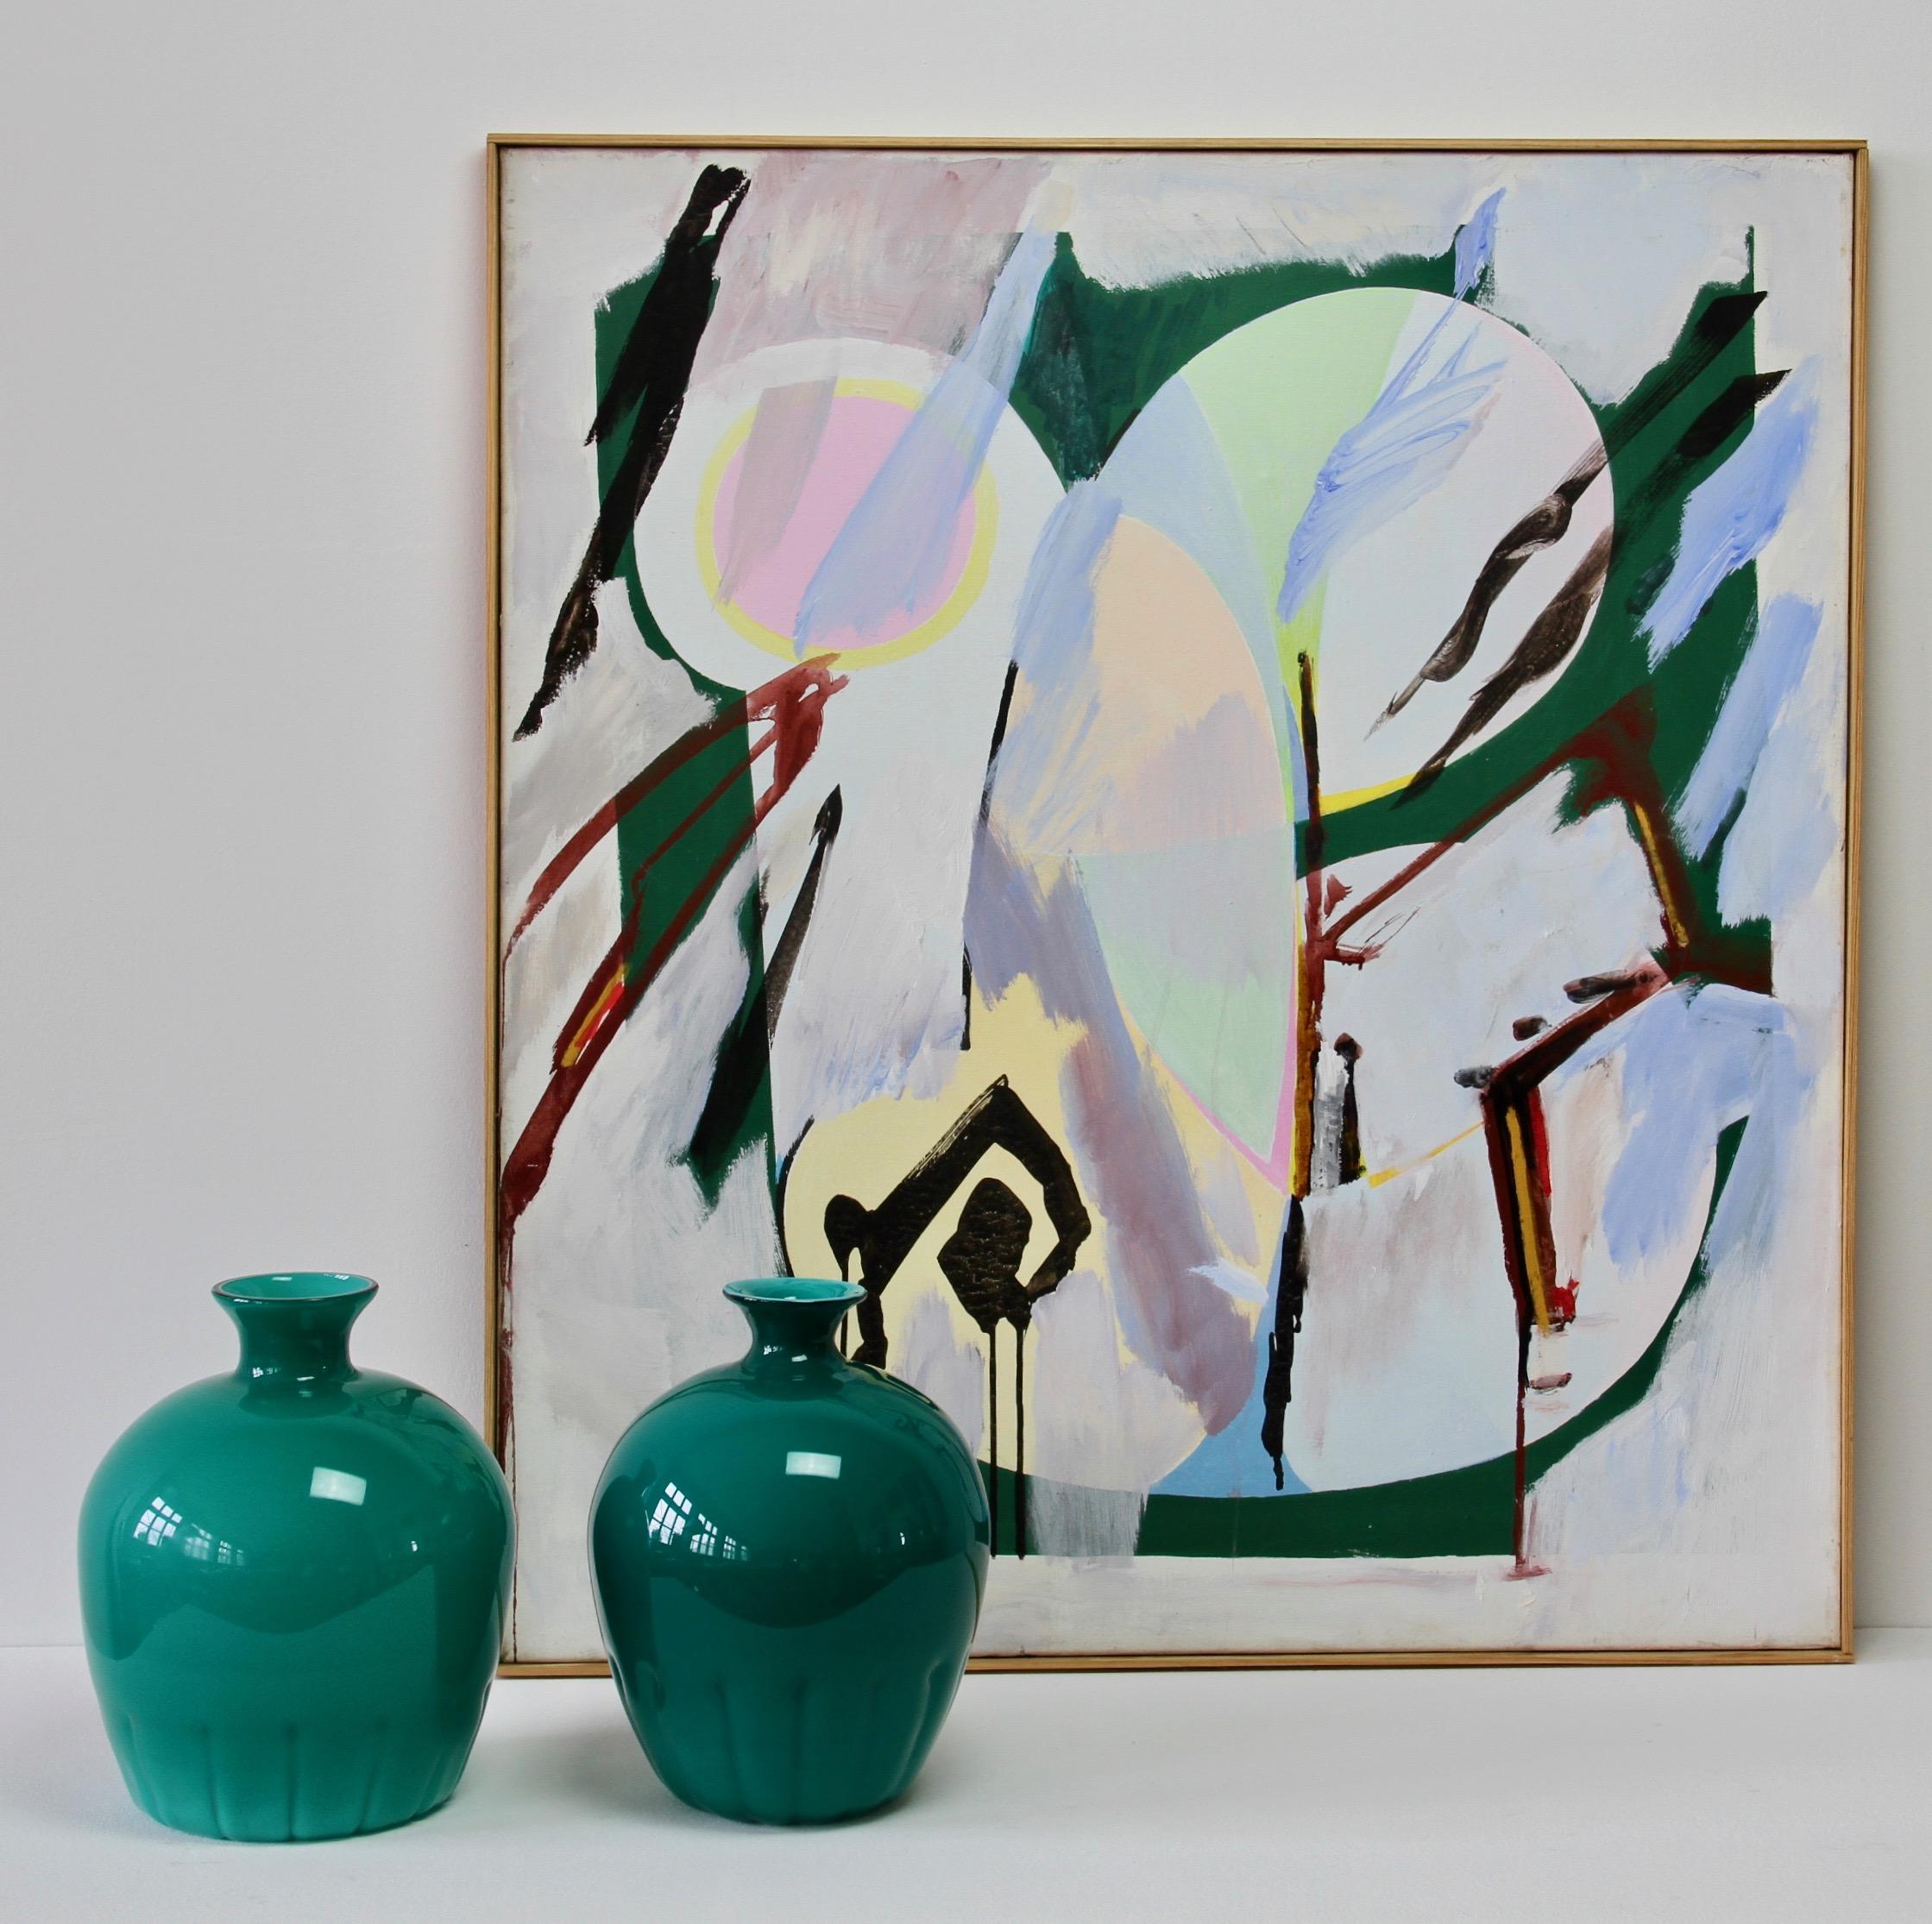 Set - featuring a pair of Italian teal green Murano glass vases by Cenedese, circa 1970-1990 and a wonderful informal abstract modernist oil painting signed by German artist Walter Wohlschlegel (1907-1999). This piece is titled 'Hochsommer' (high